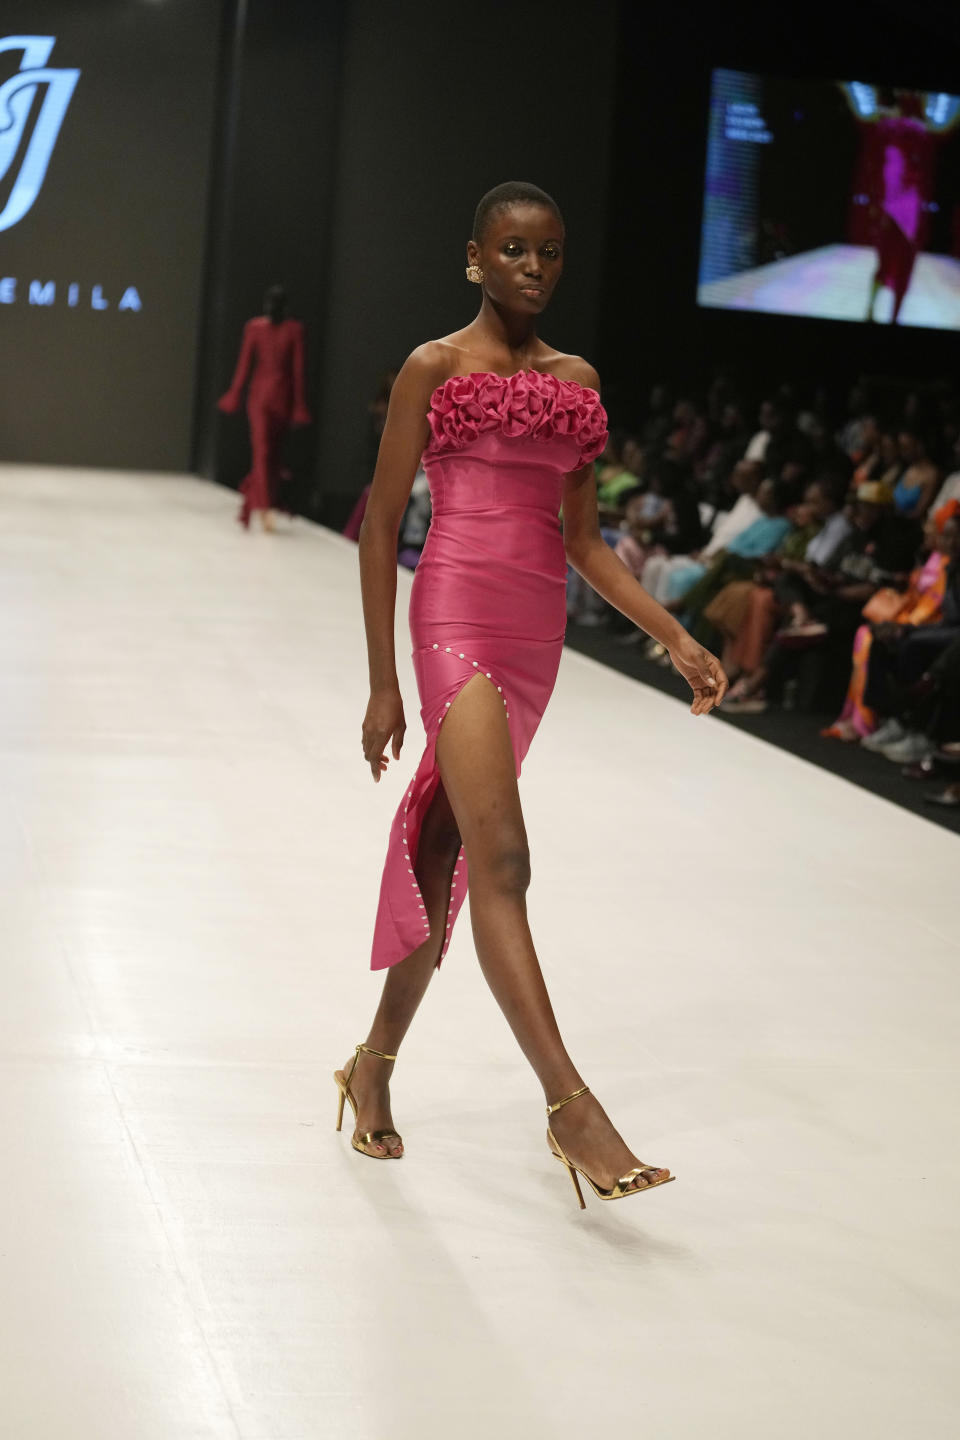 A model wears a creation by Jewel Jemila during the Lagos Fashion Week in Lagos, Nigeria, Thursday, Oct. 26, 2023. Africa's fashion industry is rapidly growing to meet local and international demands but a lack of adequate investment still limits its full potential, UNESCO said Thursday in its new report released at this year's Lagos Fashion Week show. (AP Photo/Sunday Alamba)